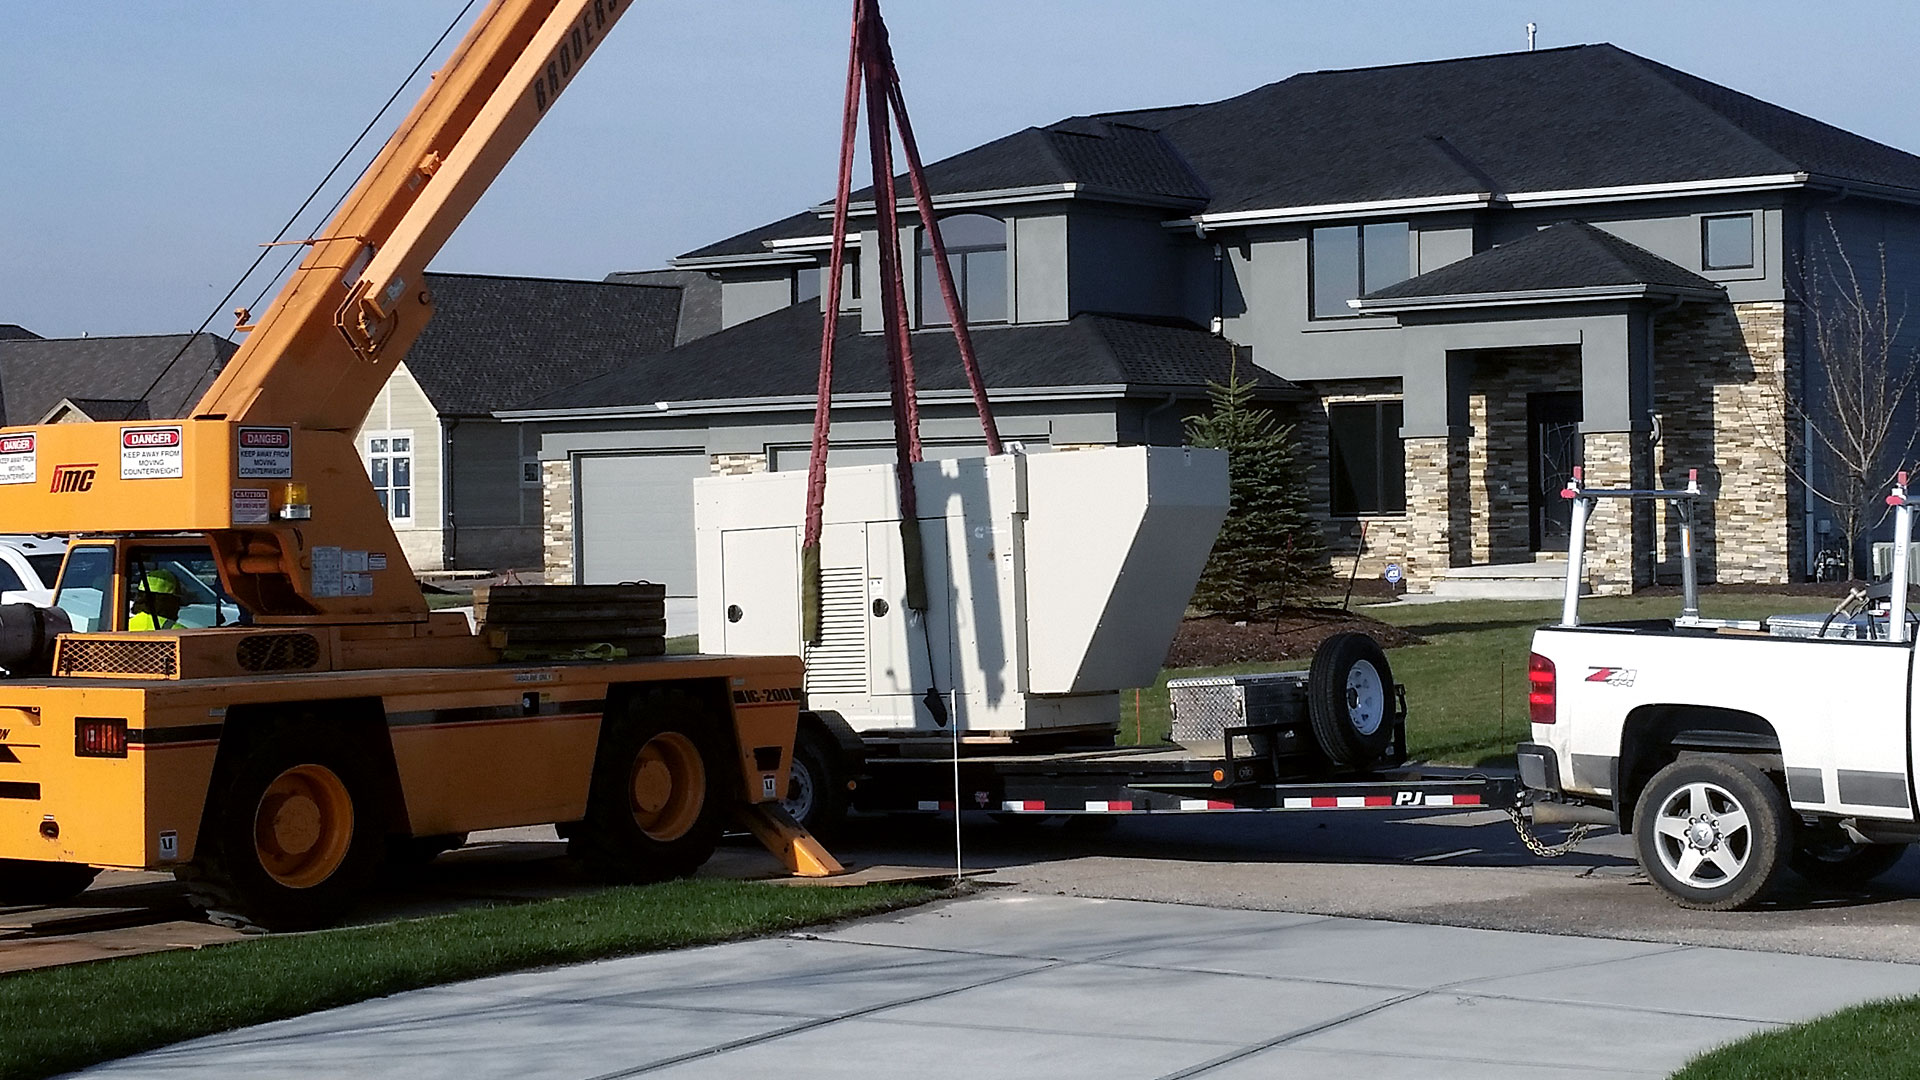 standby generator outside home